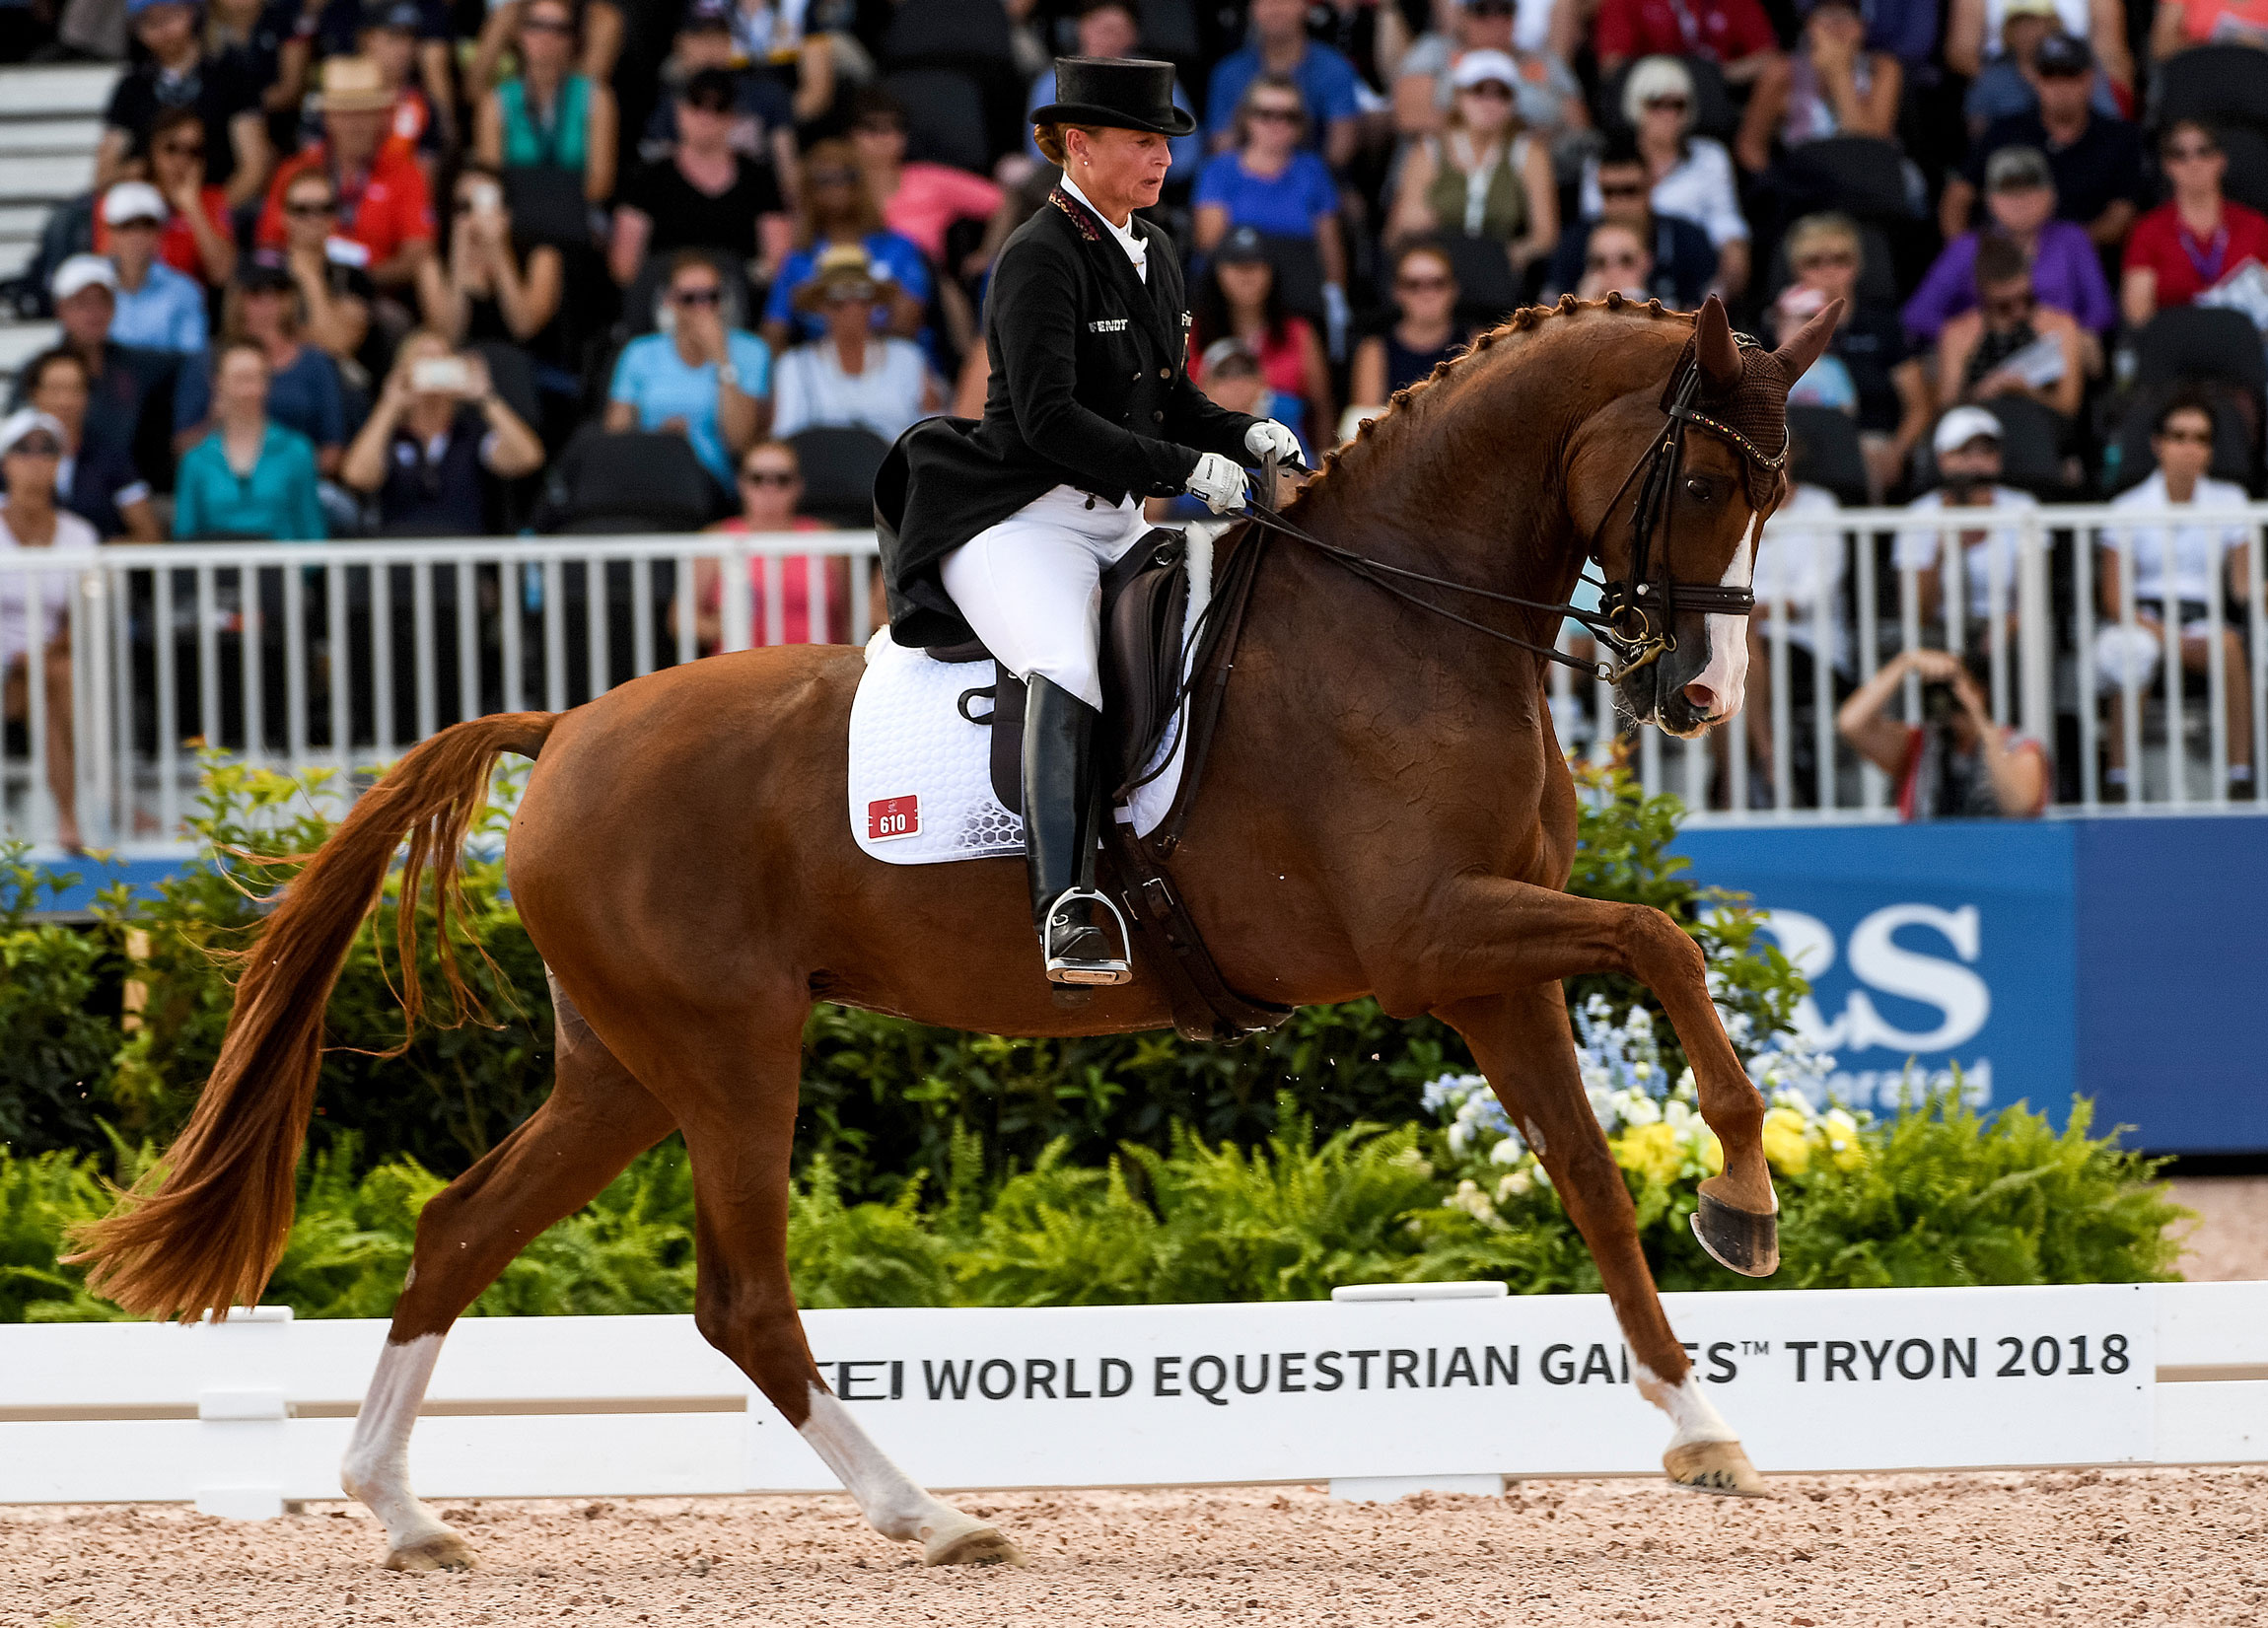 Dressage: Isabell Werth and Bella Rose competing in 2018 FEI World Equestrian Games at the Tryon, The USA. 2300x1660 HD Wallpaper.